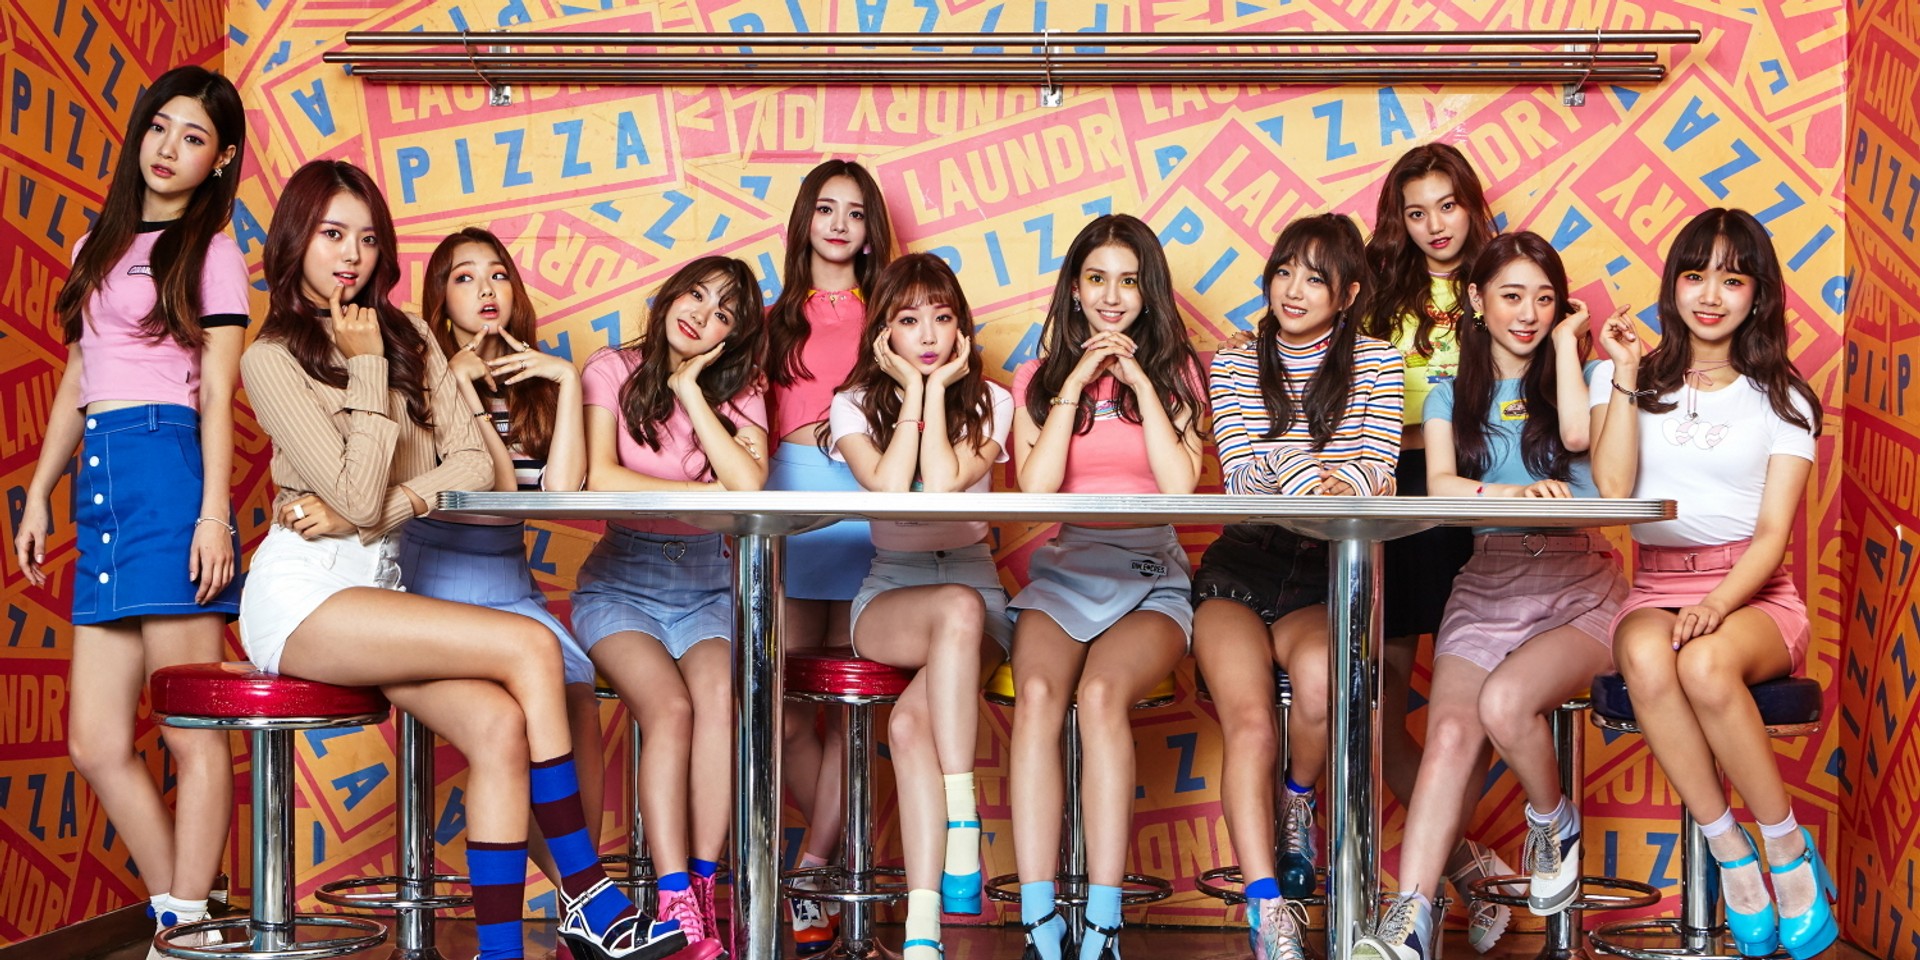 K-pop girl group I.O.I to reunite in October, Chung Ha and eight others confirmed to return